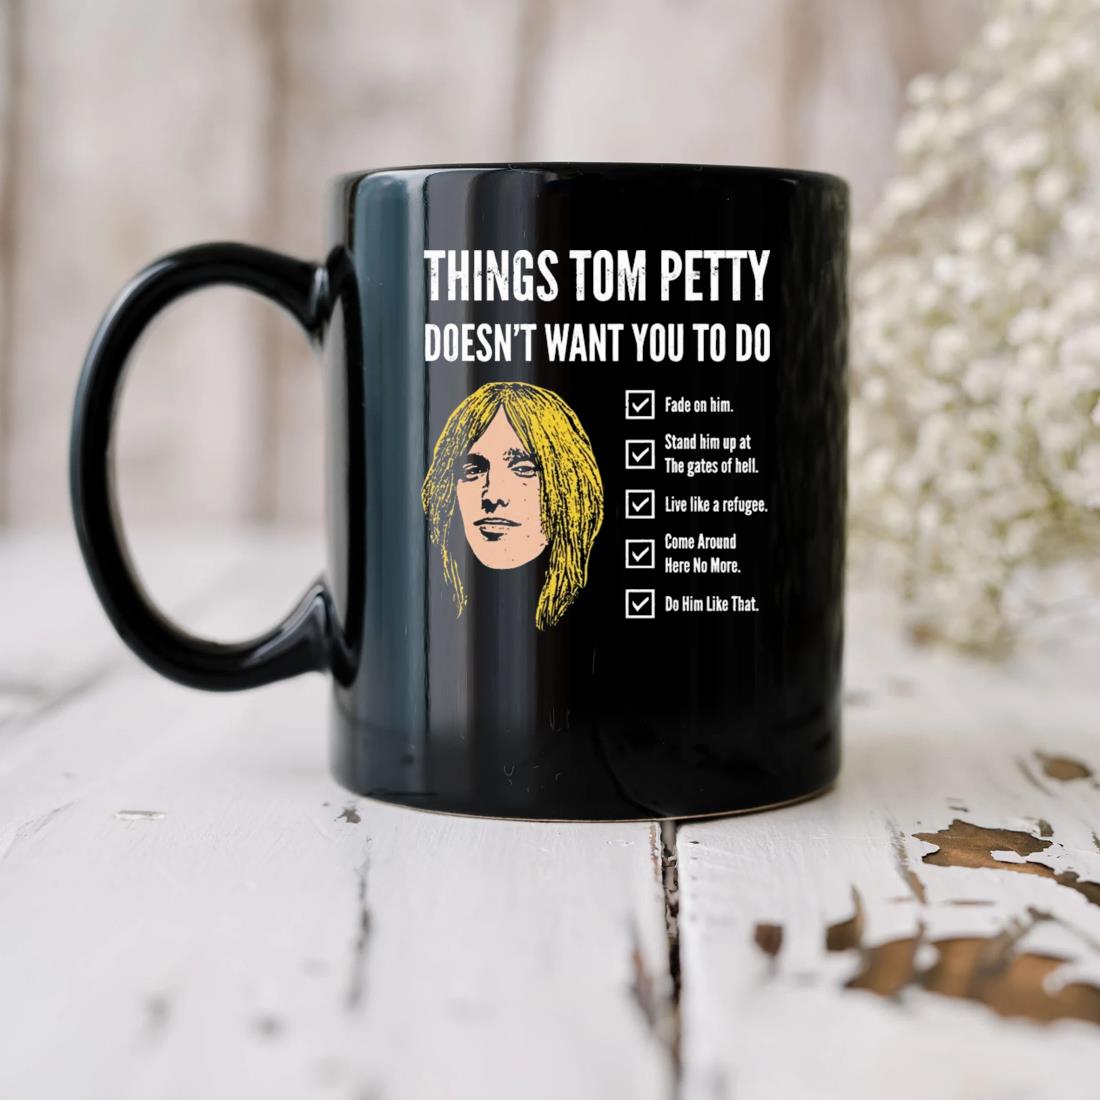 Things Tom Petty Doesn't Want You To Do Mug